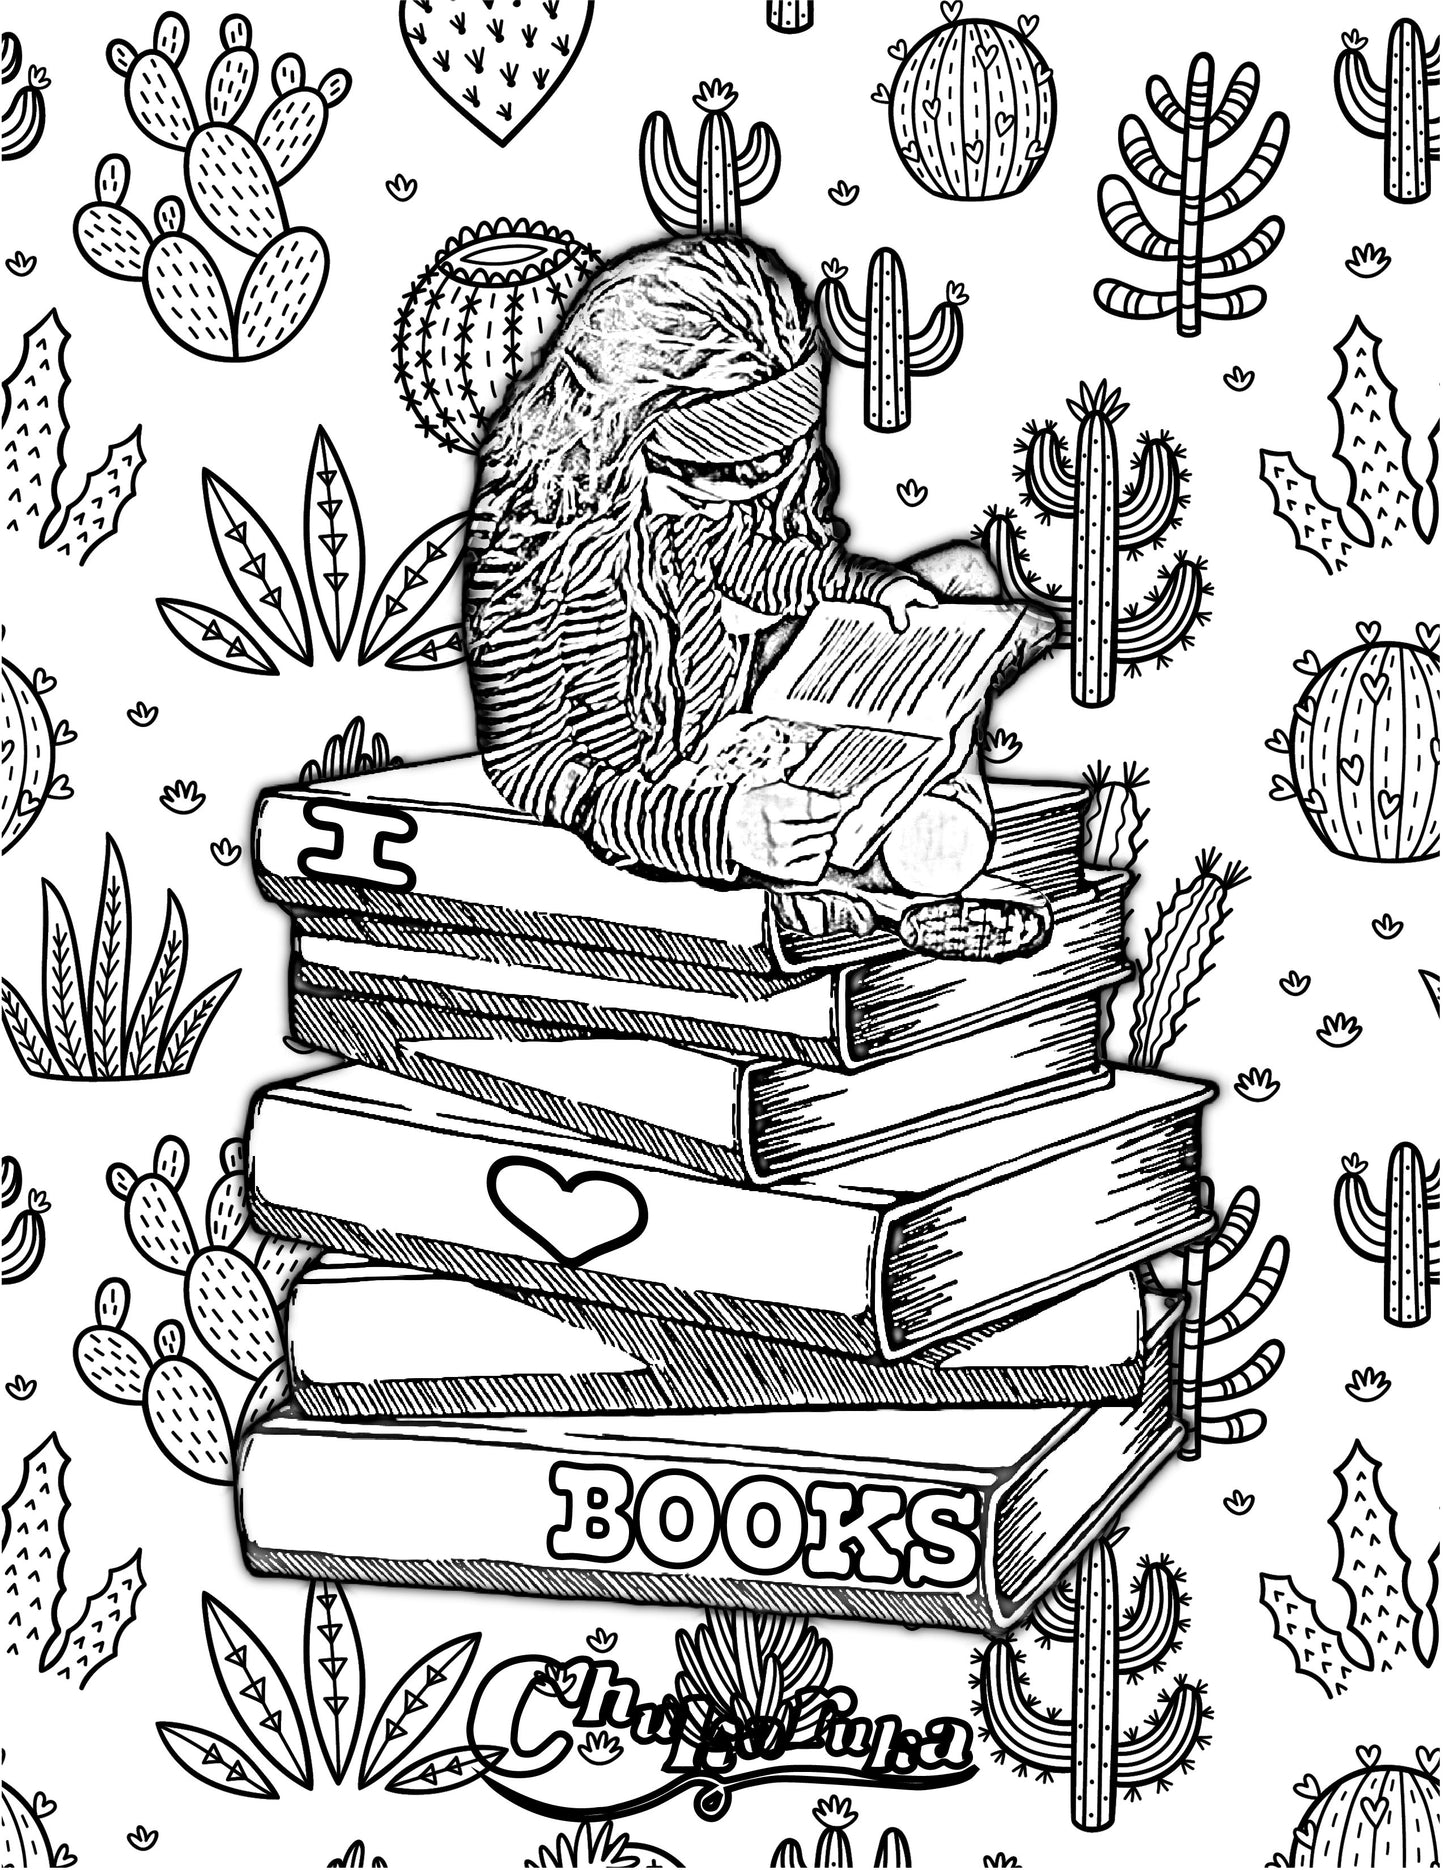 Magical Reading Adventure: Girl atop Floating Books amidst Cacti-Scenery Coloring Page